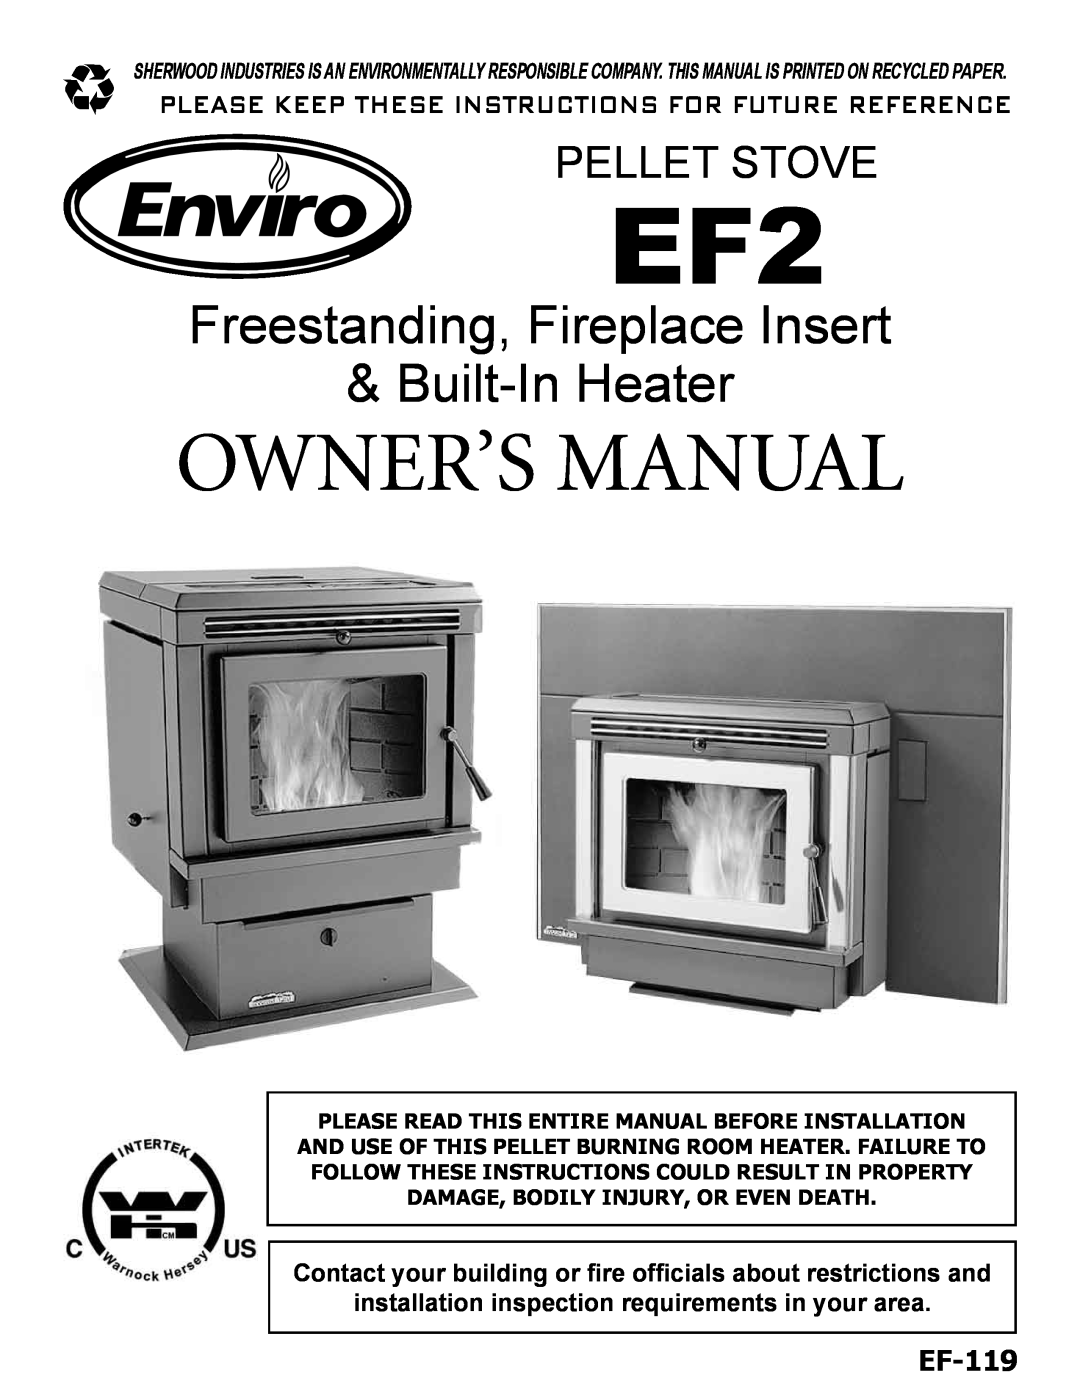 Enviro EF-119 owner manual Please Read This Entire Manual Before Installation, Damage, Bodily Injury, Or Even Death 